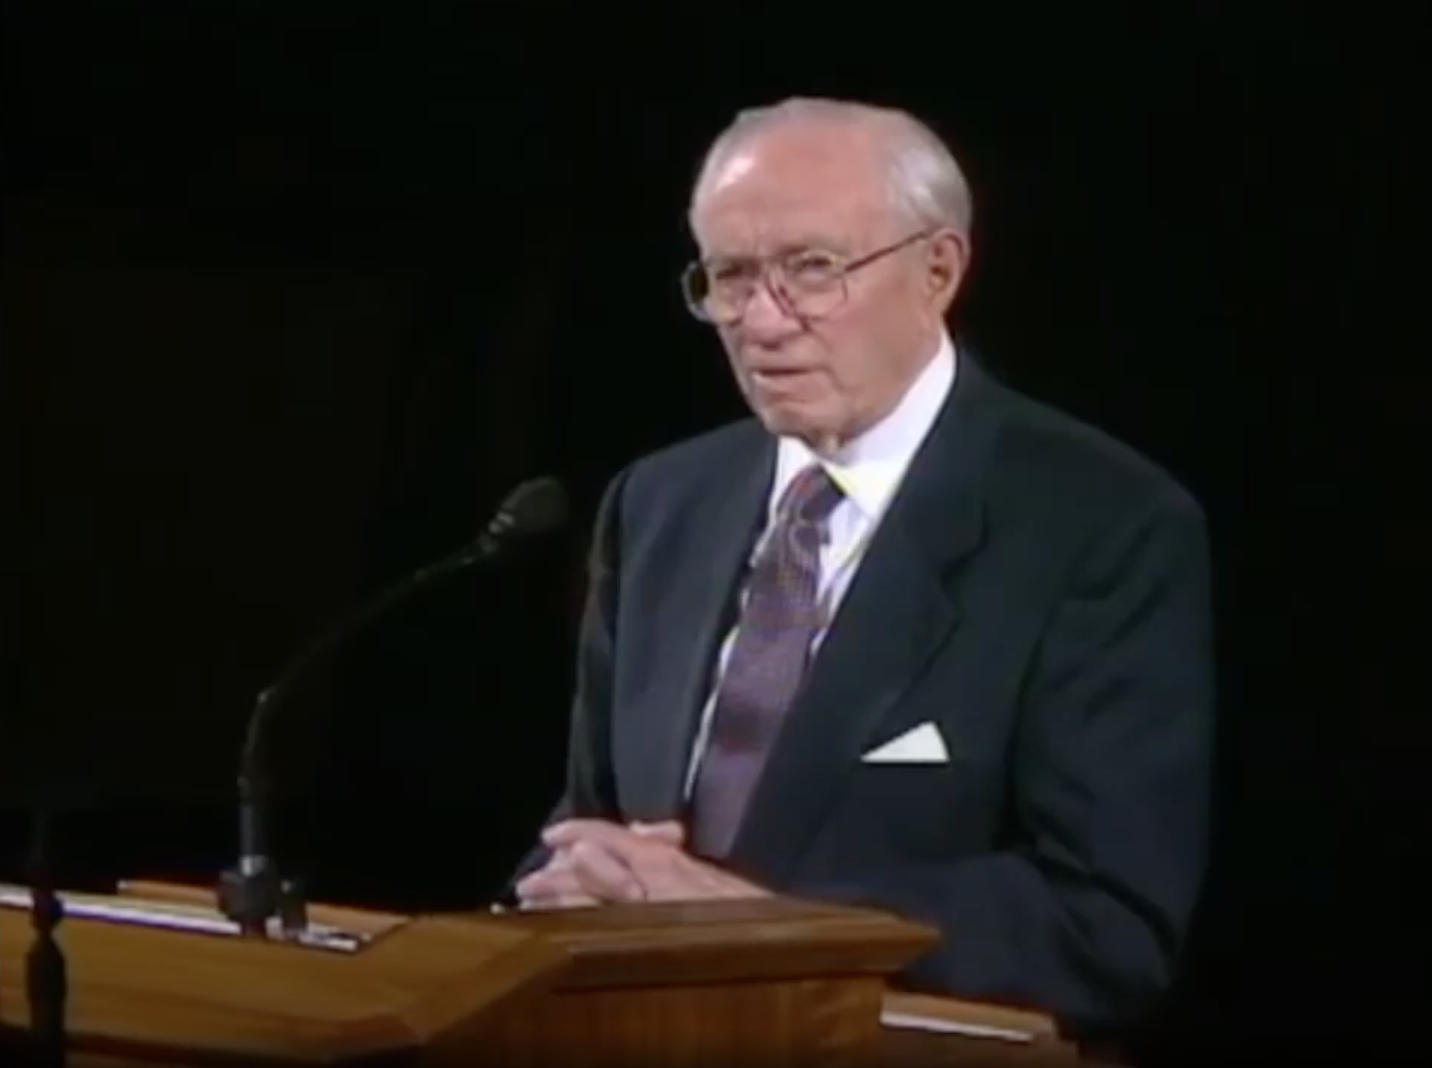 A capture of a video broadcast showing President Gordon B Hinckley at the pulpit in front of a black background reading the Family Proclamation for the first time as part of his message at the General Relief Society Meeting held September 23, 1995, in Salt Lake City, Utah.